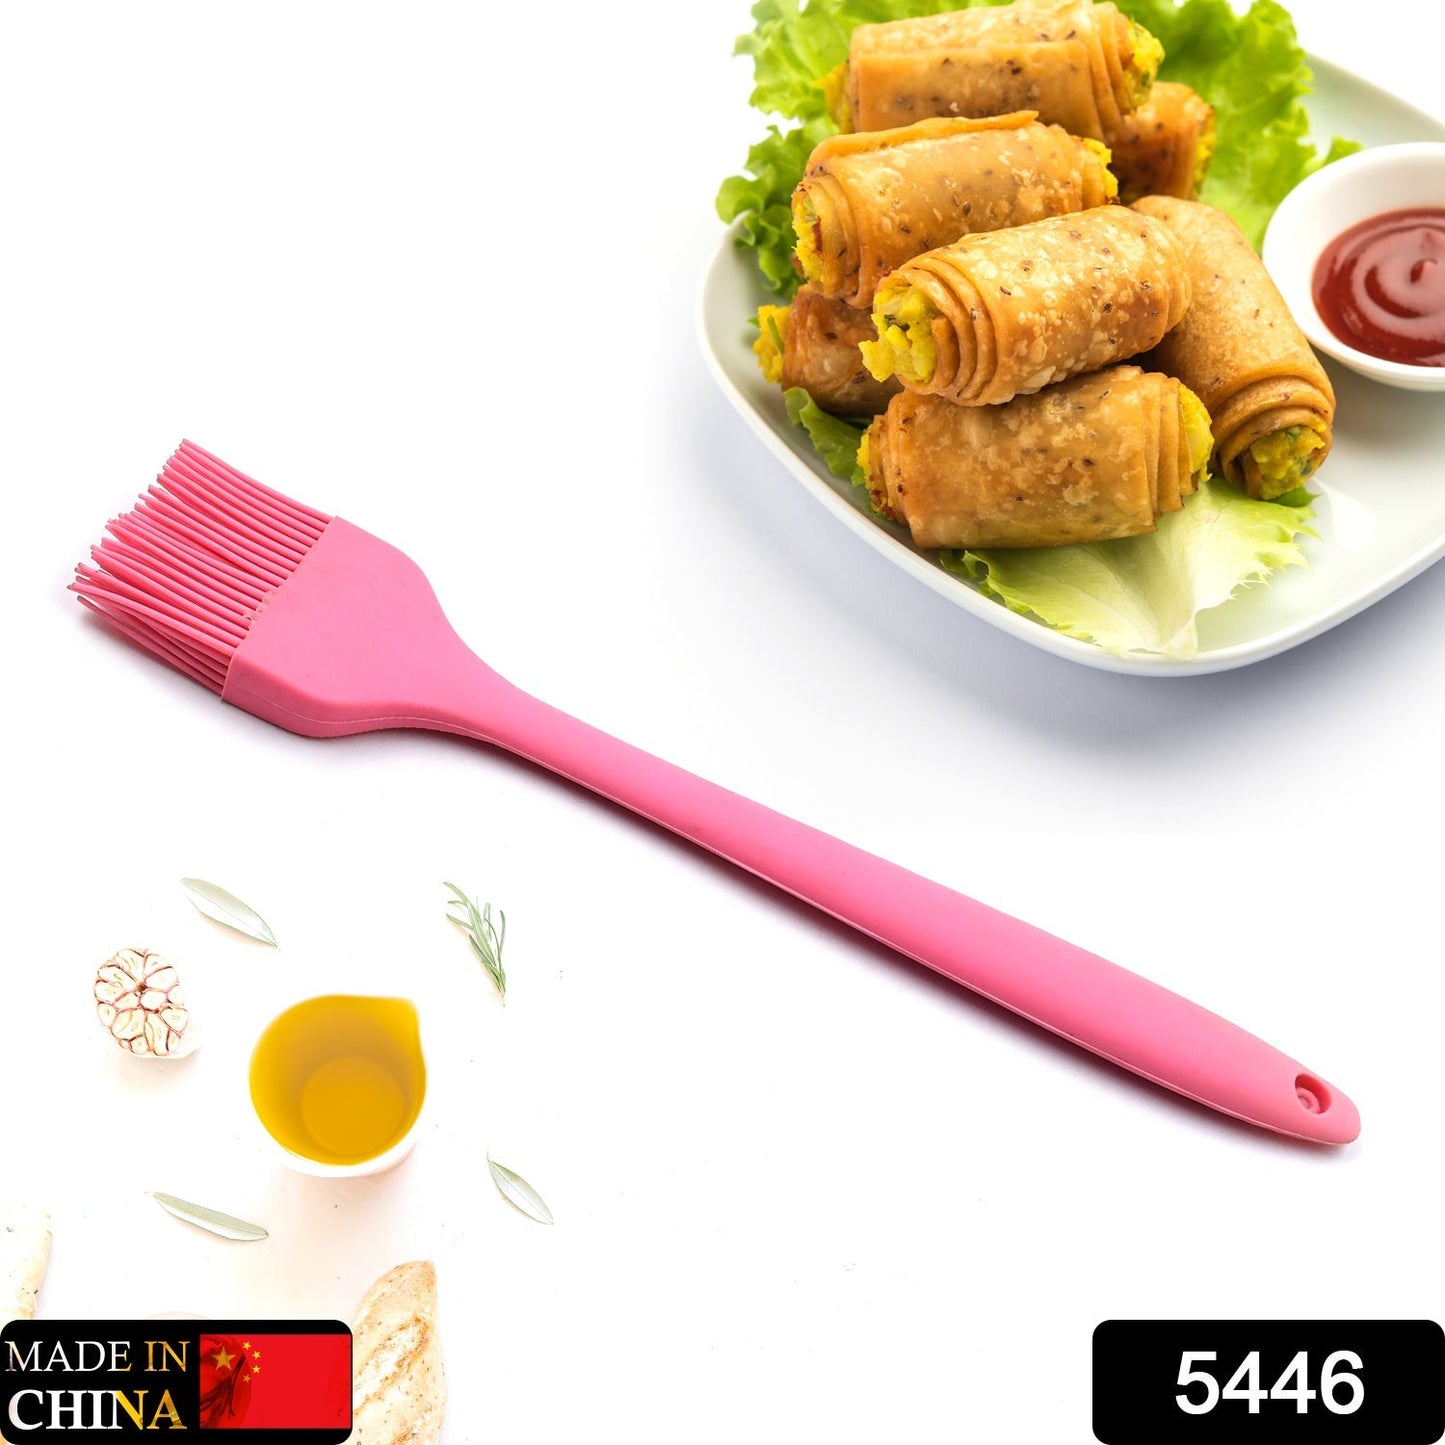 5446 Silicone Basting Brush - Heat Resistant Pastry Baking Bread Cake Oil Butter Brushes for BBQ Grill Kitchen Brush (26cm)